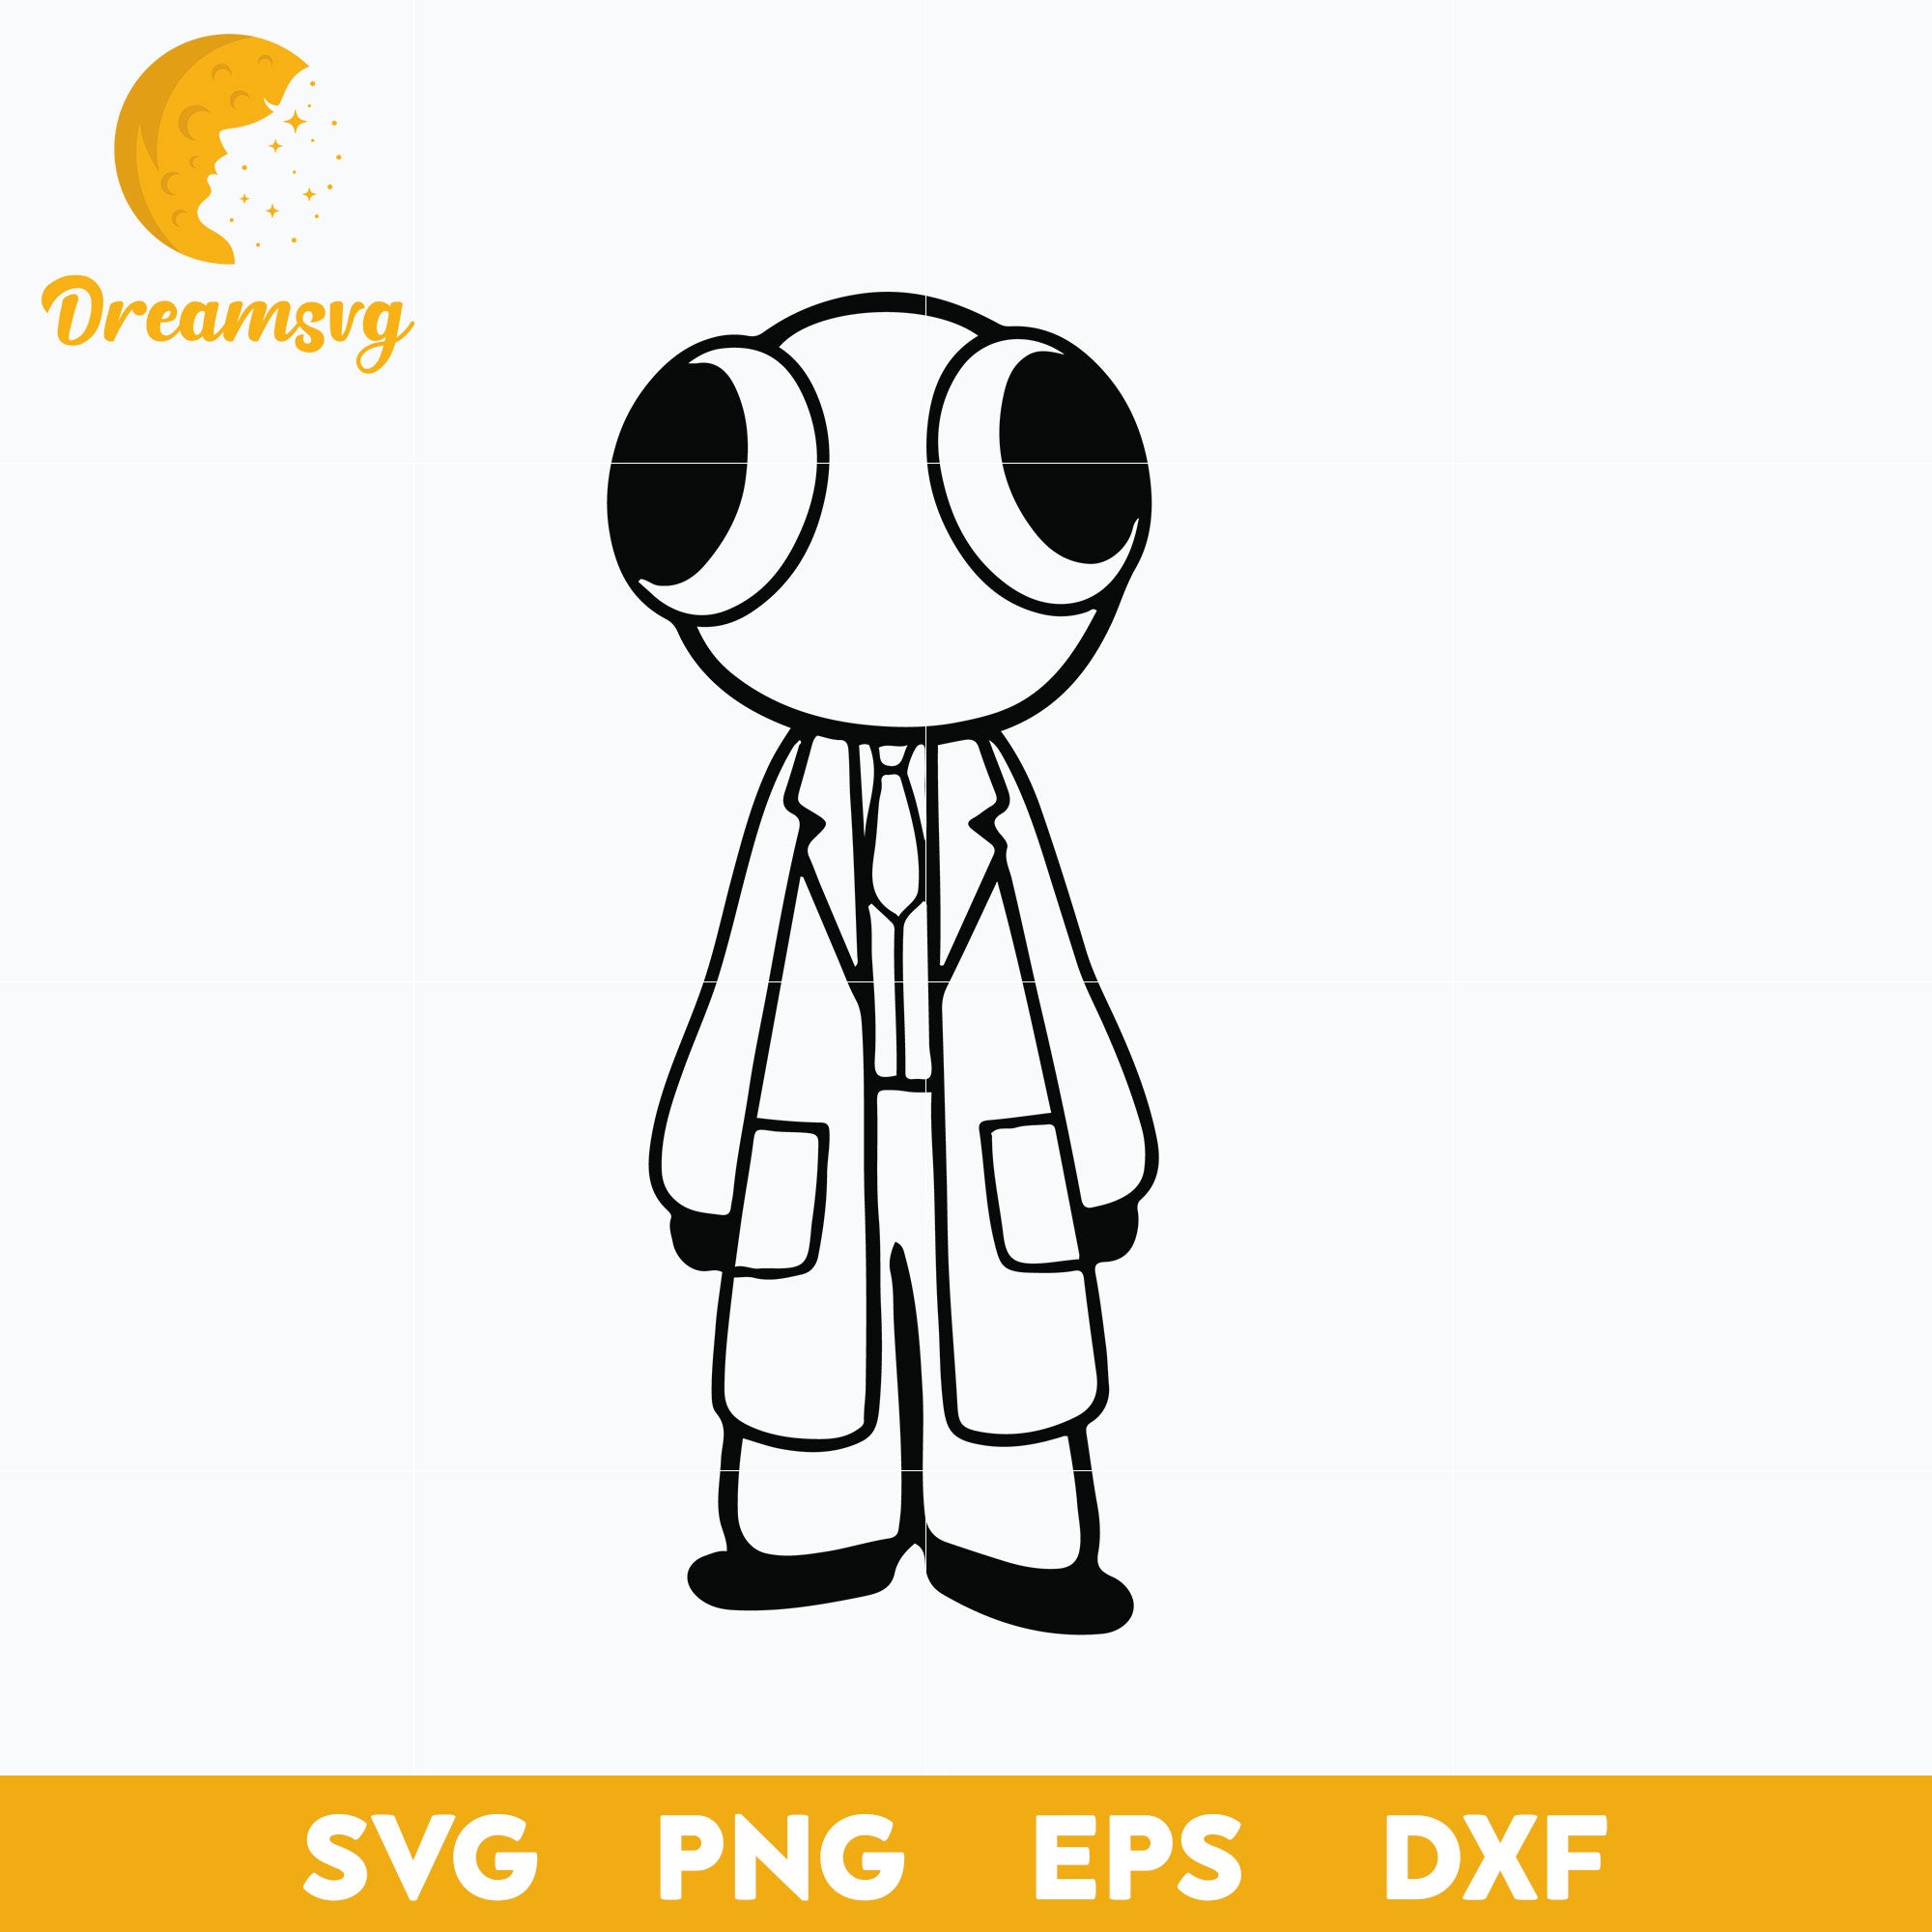 Green from Rainbow Friends Outline SVG, Funny SVG, PNG DXF EPS Digital